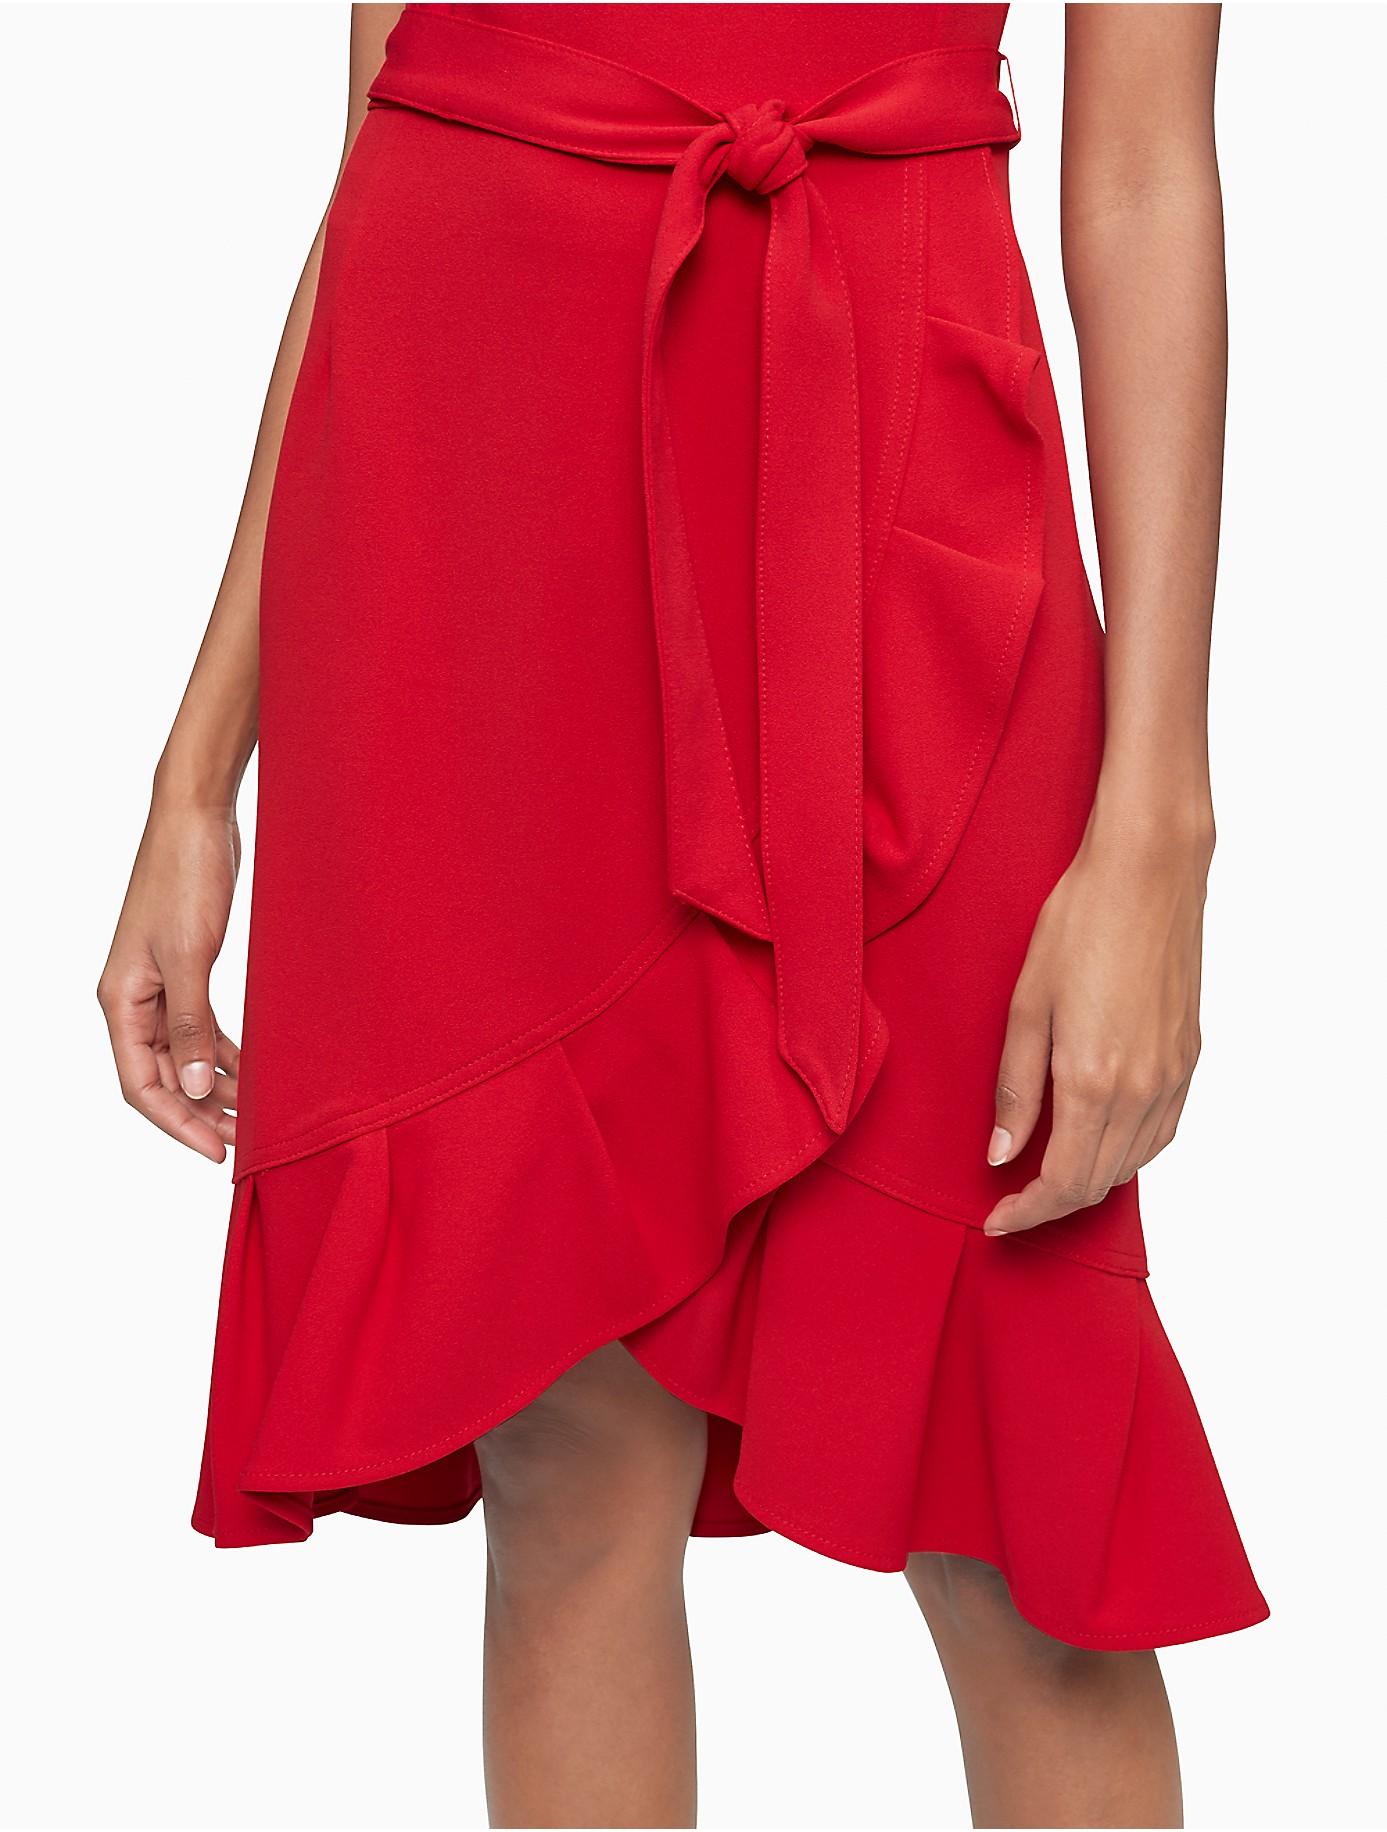 Calvin Klein Synthetic Solid Belted Ruffle Hem Dress in Red - Lyst